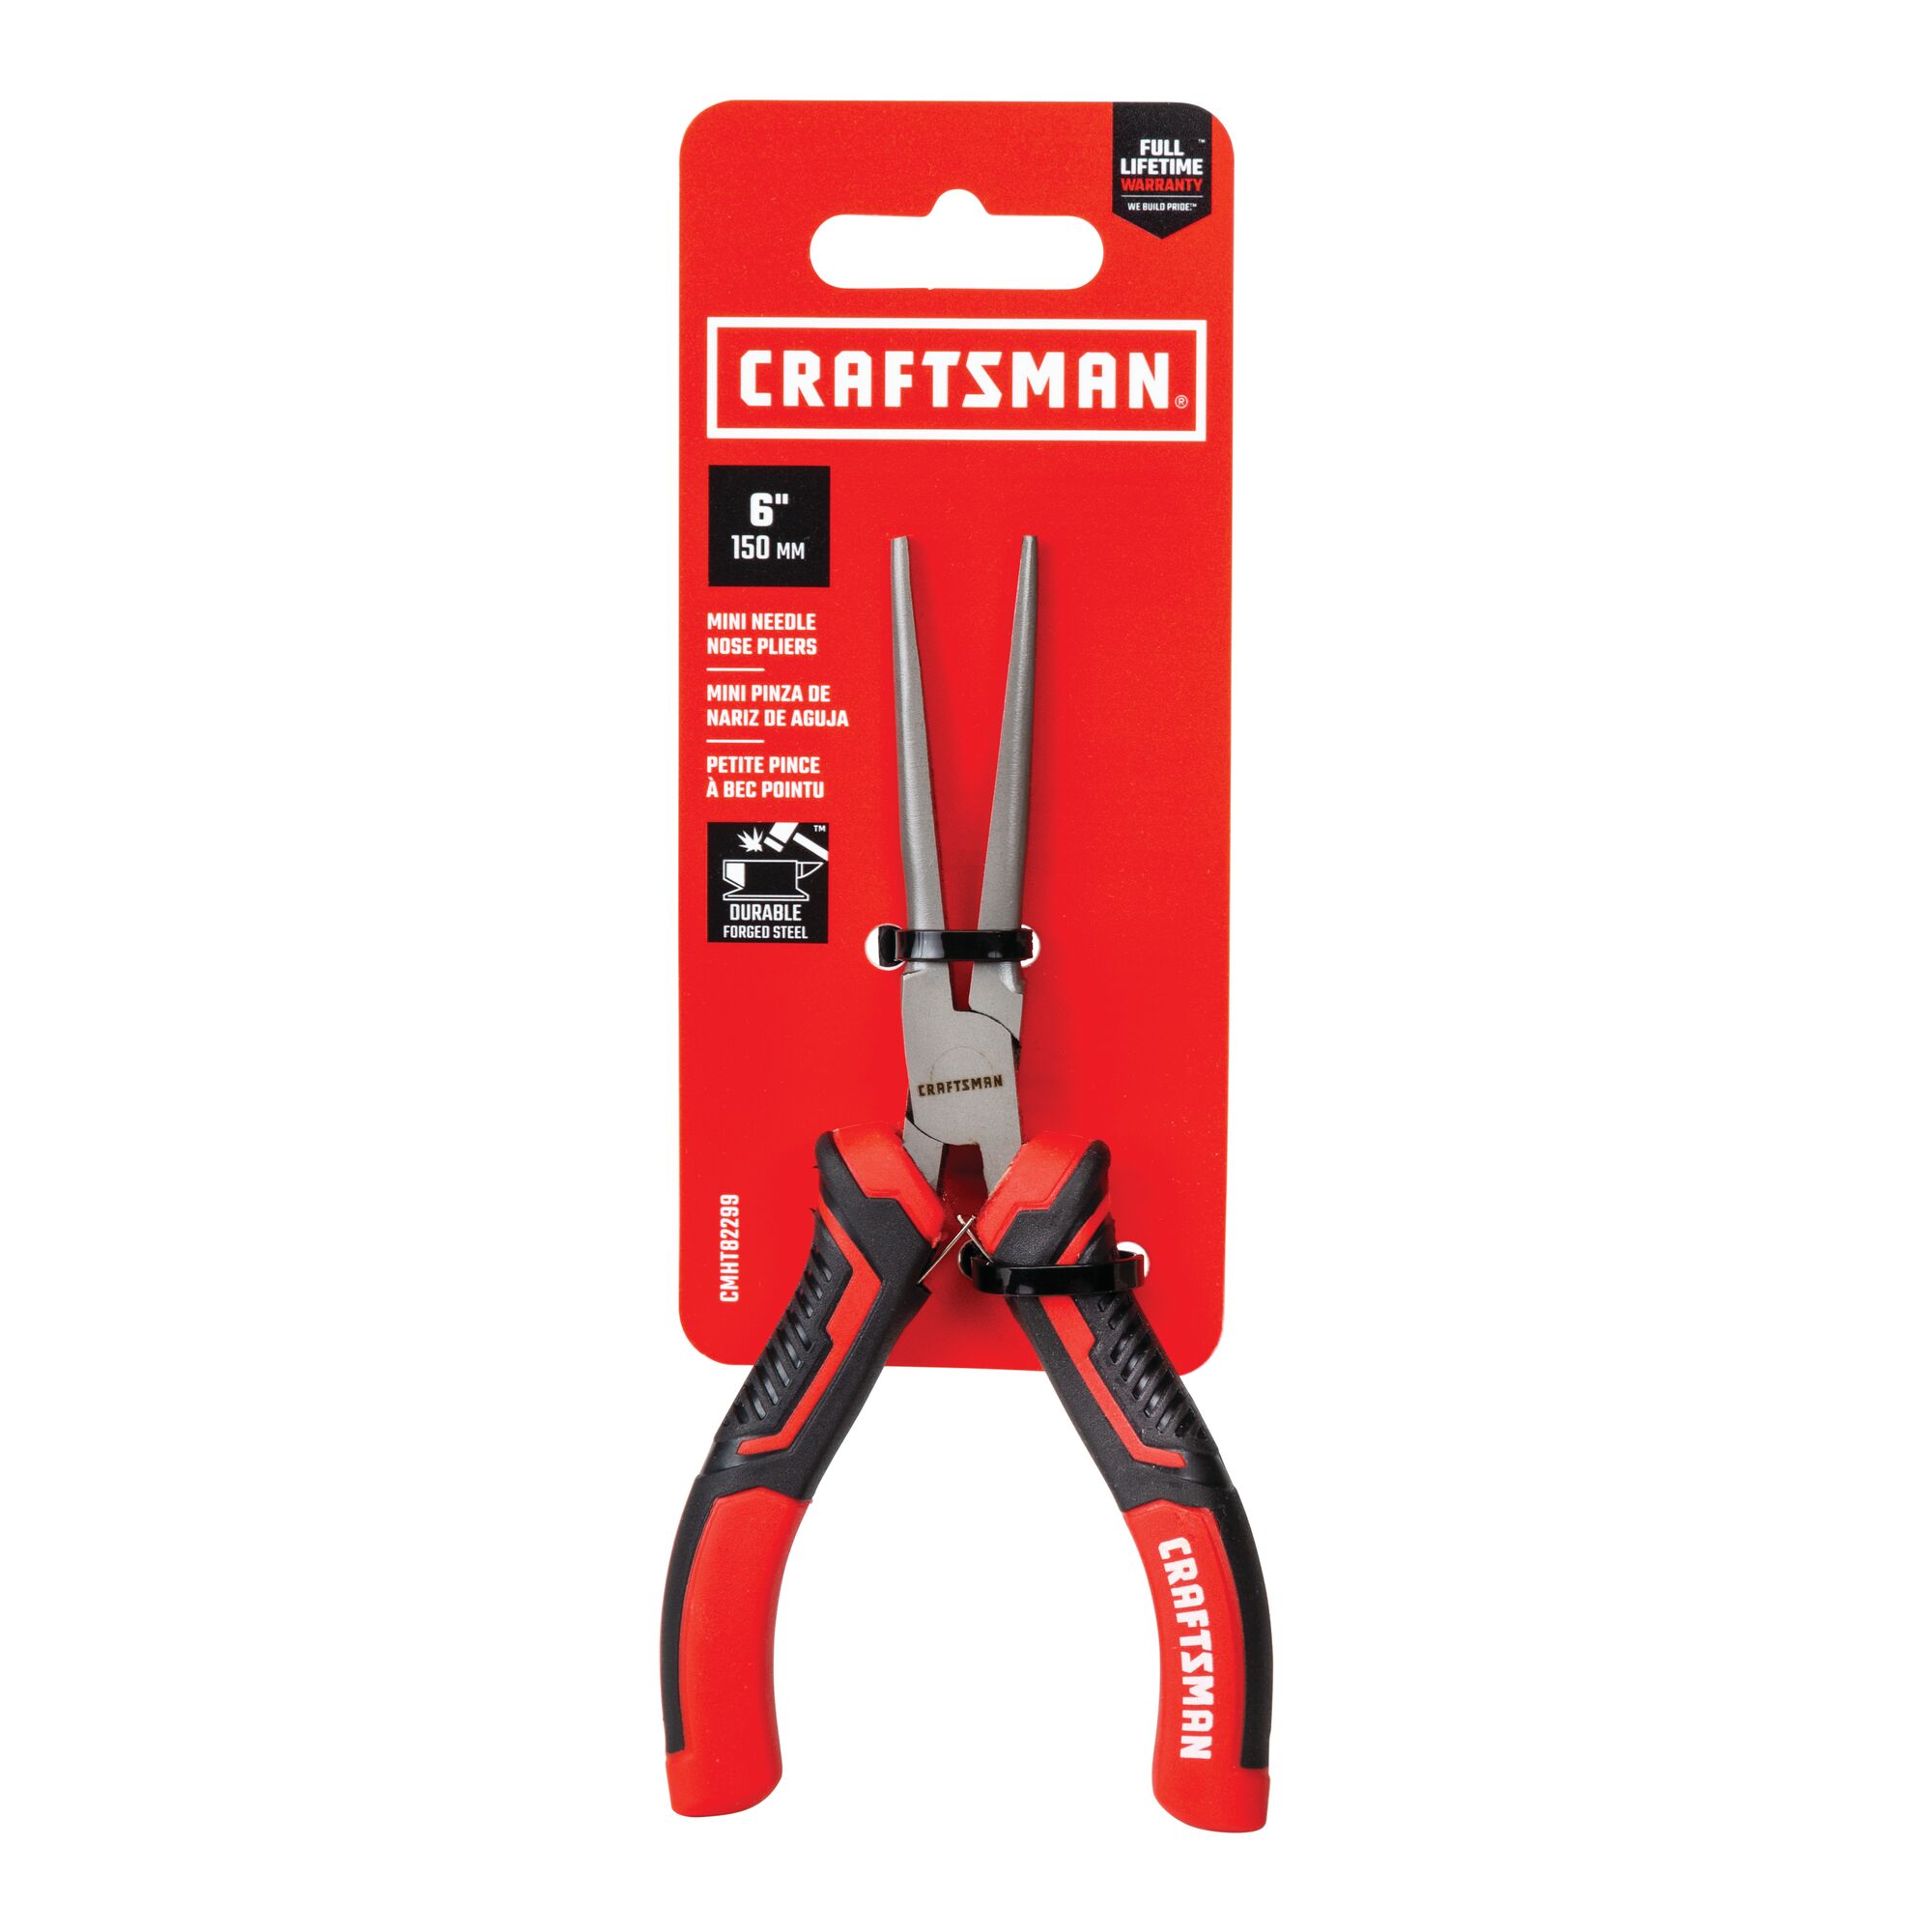 View of CRAFTSMAN Pliers: Long Nose packaging